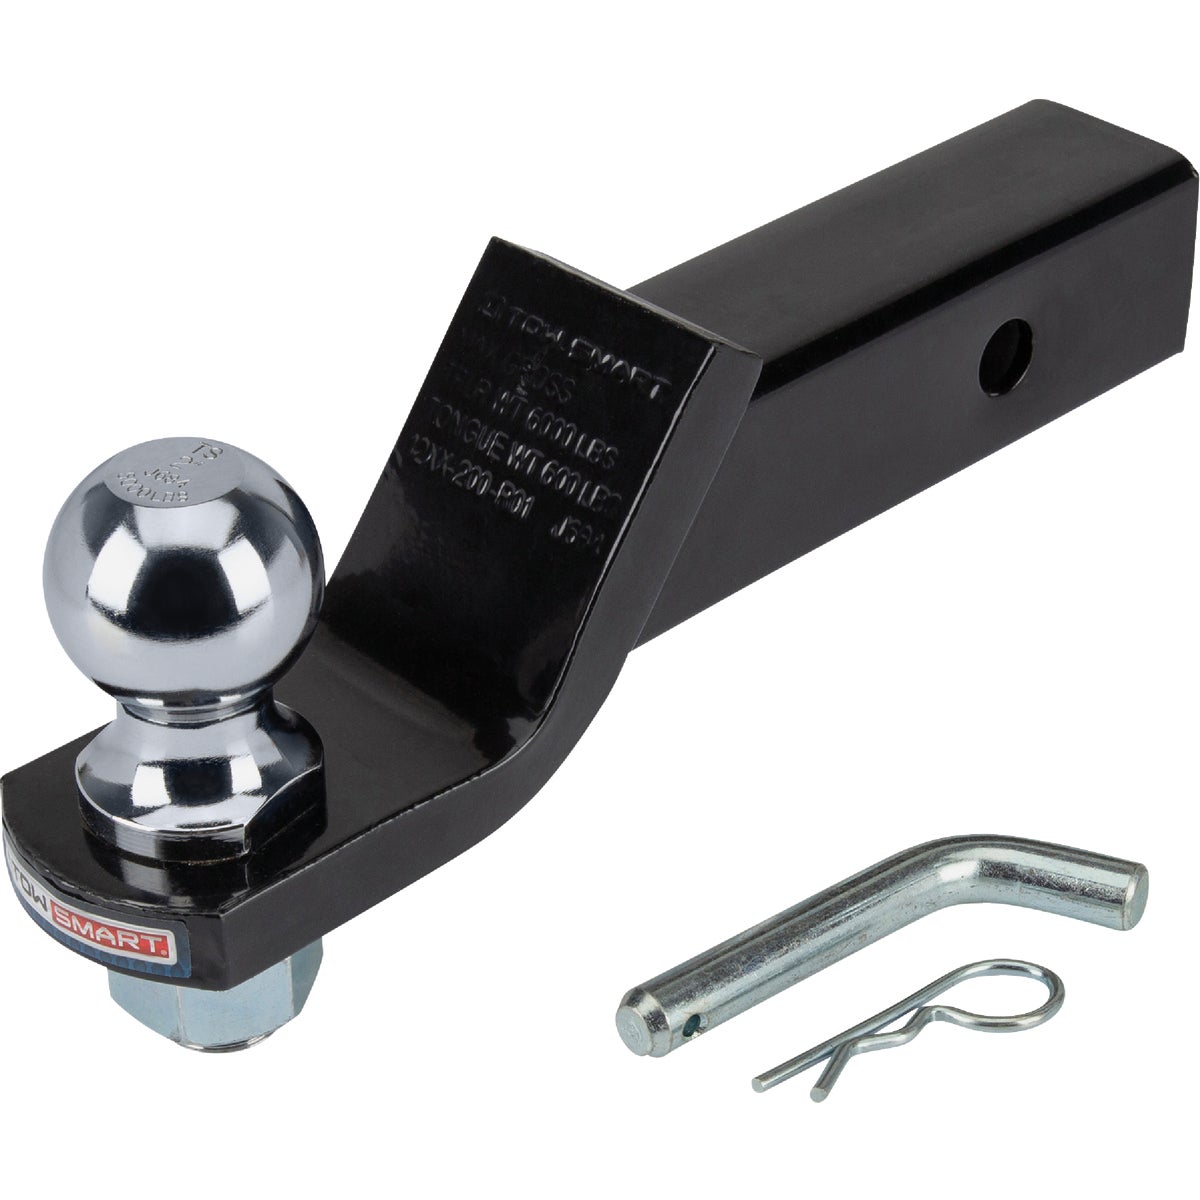 Item 582122, The Class III Standard Mount Starter Kit has the towing essentials to get 